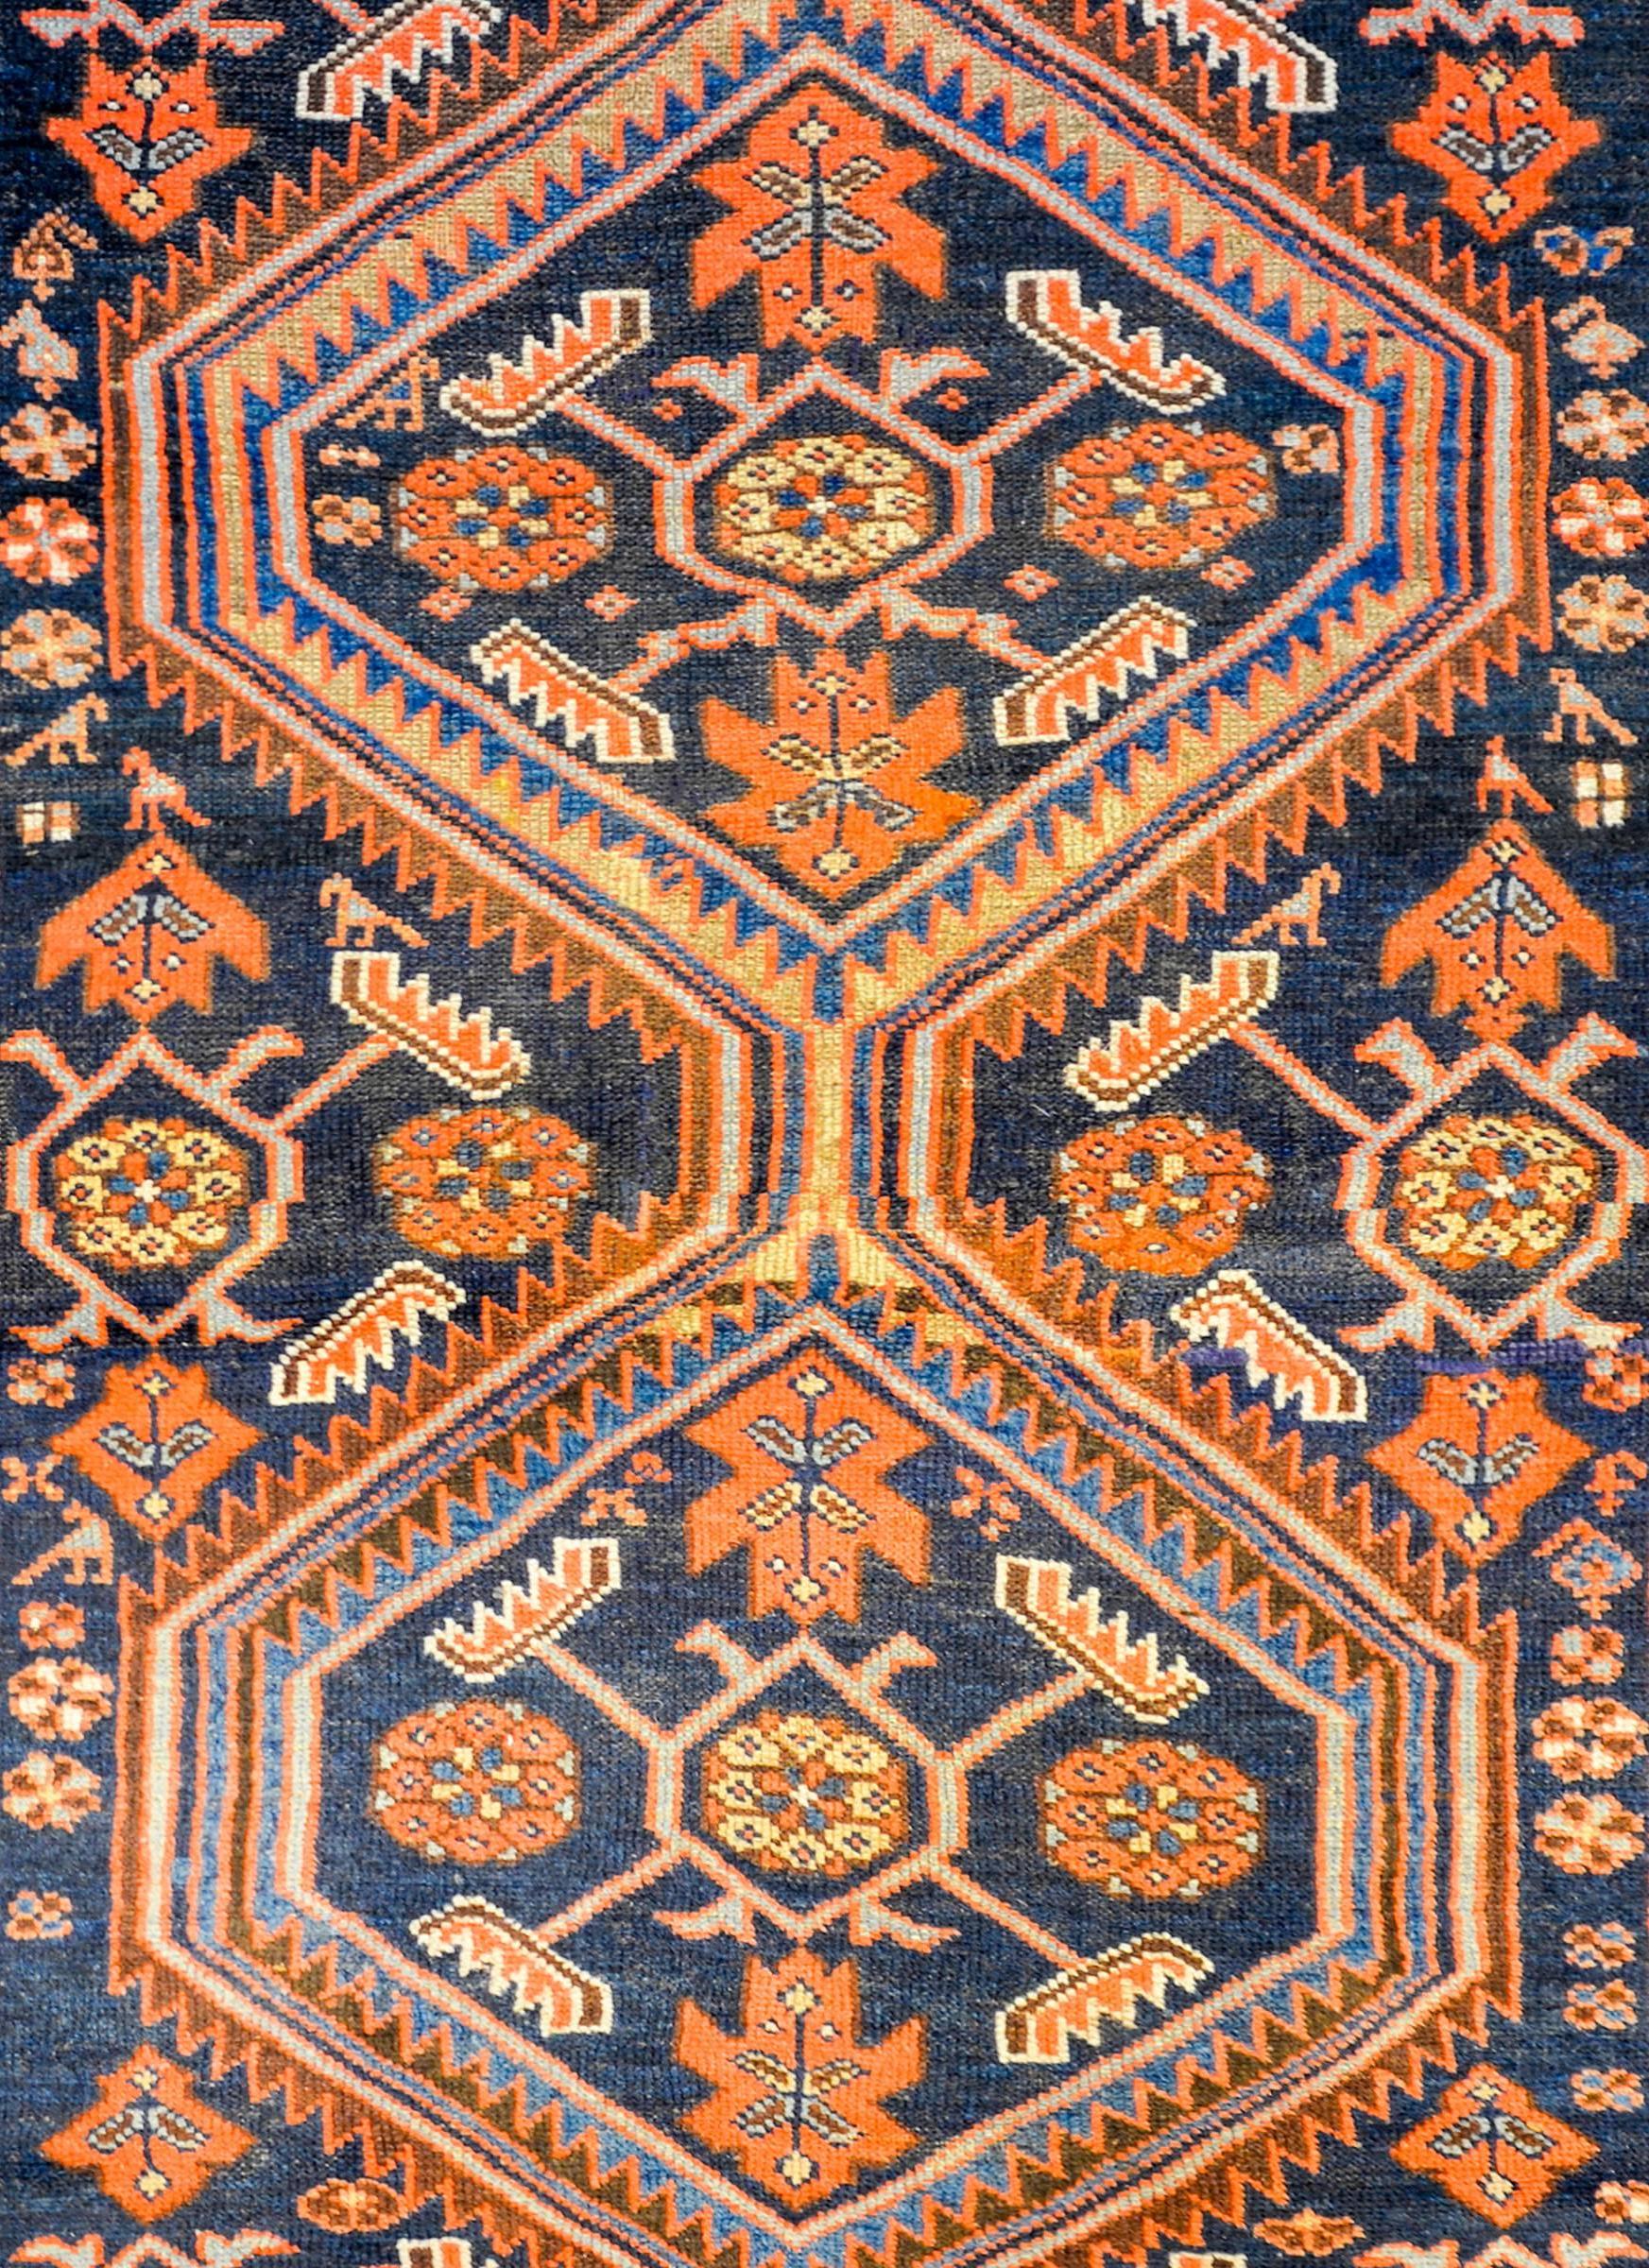 An exceptional early 20th century Kurdish rug with a fantastic pattern containing two large diamond form medallions, each with a stylized floral pattern woven in crimson, gold, and light indigo, all on a dark indigo field of stylized flowers,